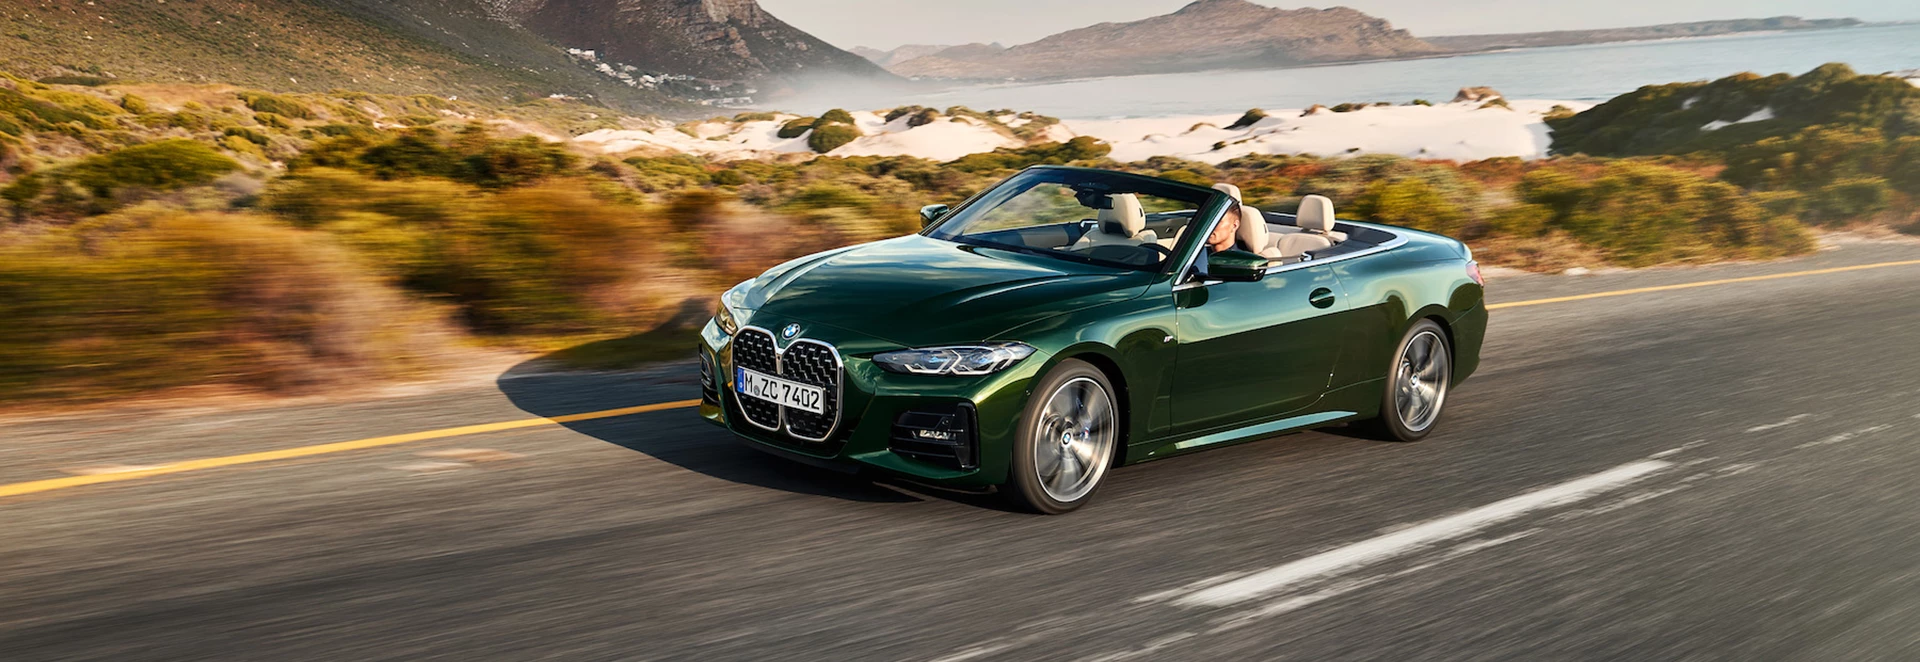 5 reasons why the BMW 4 Series Convertible is the ideal summer drop-top 